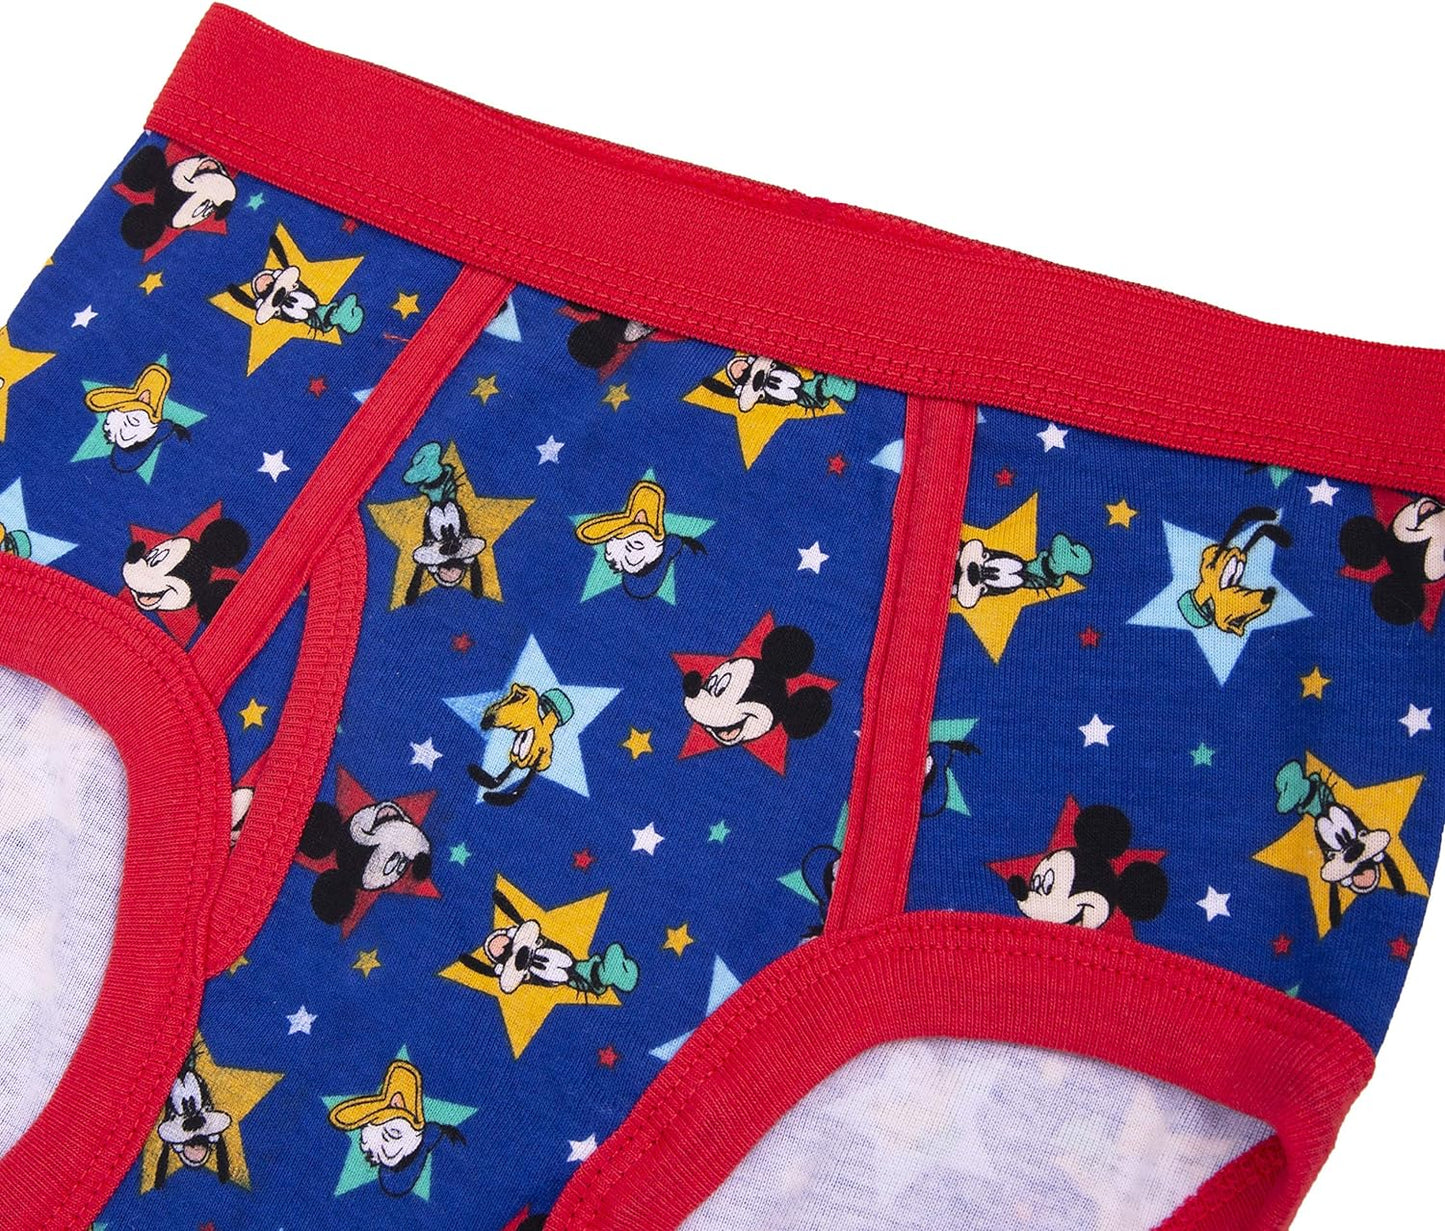 Disney Boys' Mickey Mouse 100% Combed Cotton Briefs Available in Sizes 2/3t, 4t, 4, 6 and 8